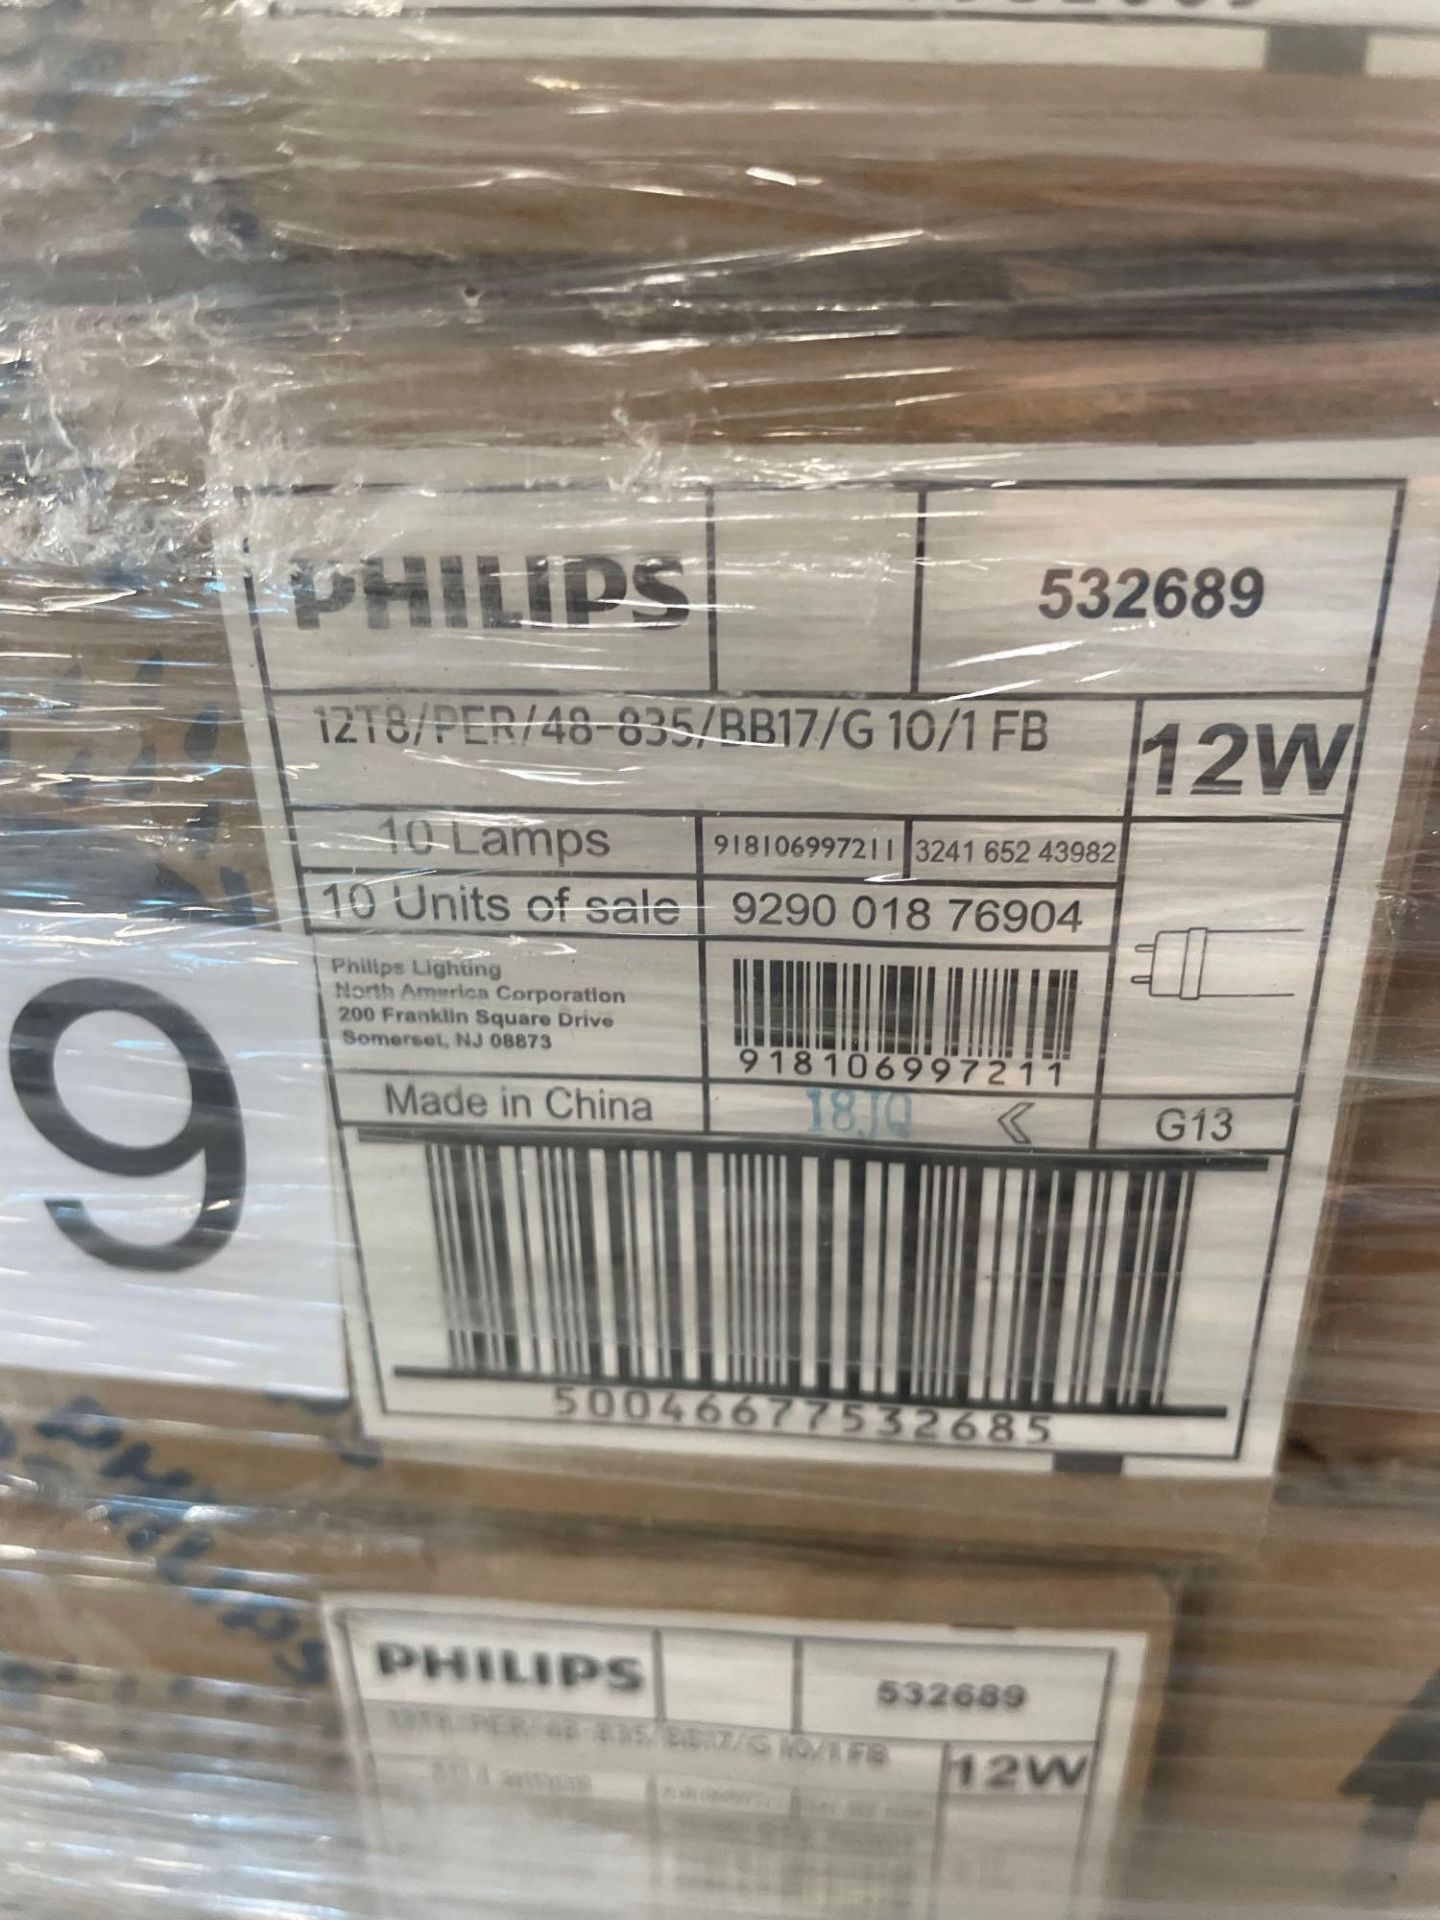 Pallet- Philips 12T8 12 W 10 Lamps per box - Image 2 of 4